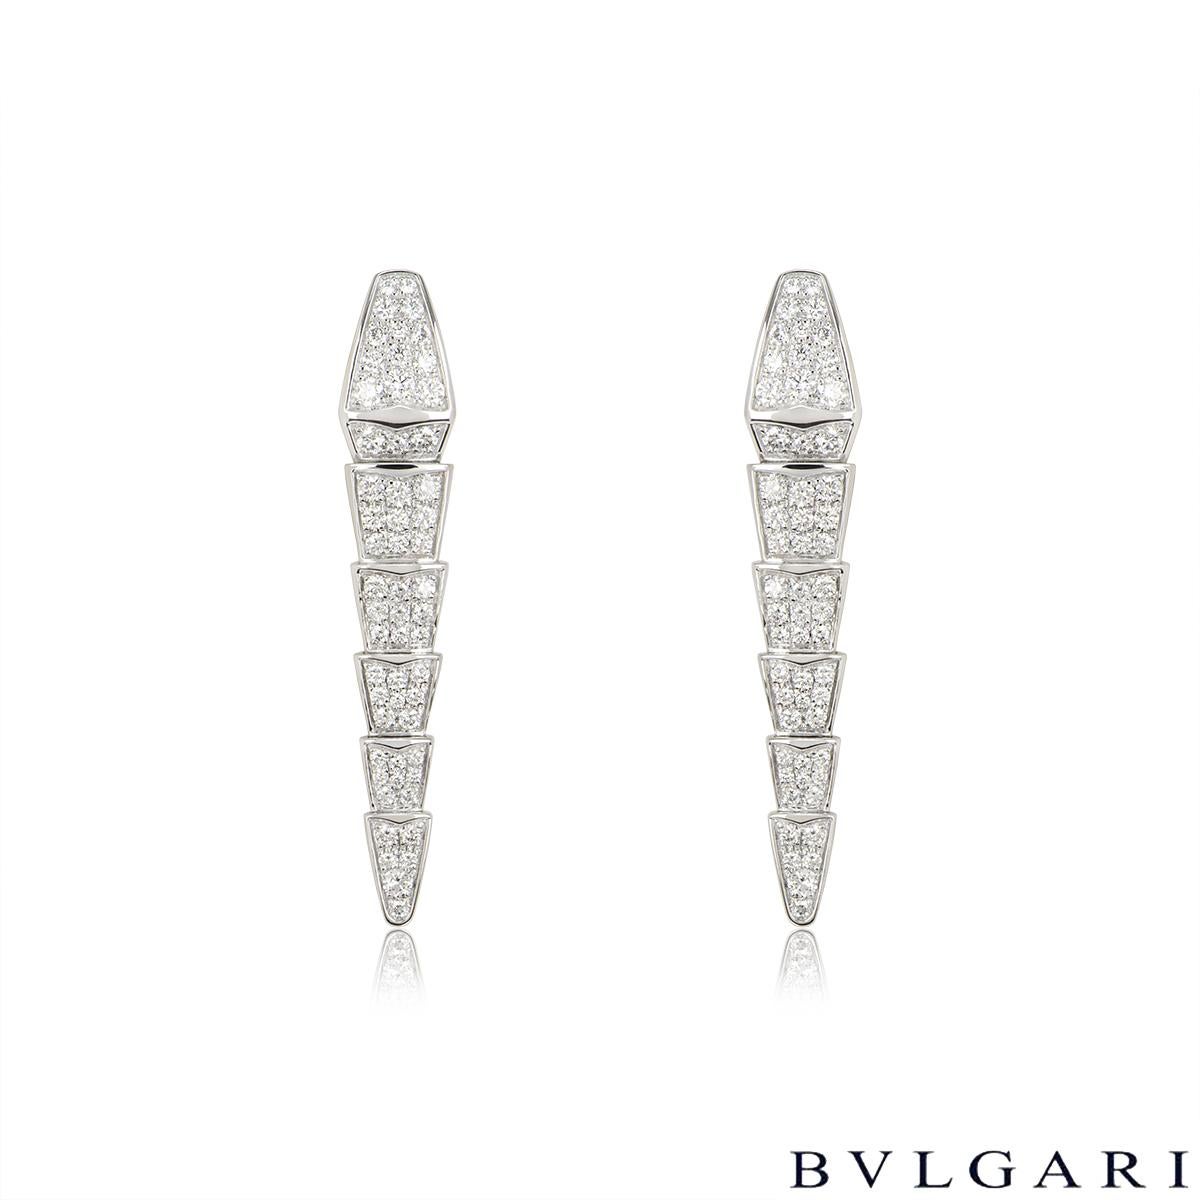 A stunning 18k white gold pair of diamond earrings by Bvlgari from the Serpenti Viper collection. The earrings are in the shape of the iconic Bvlgari Serpenti snake, each comprising of 6 flexible, graduating pave set intersections. There are 110